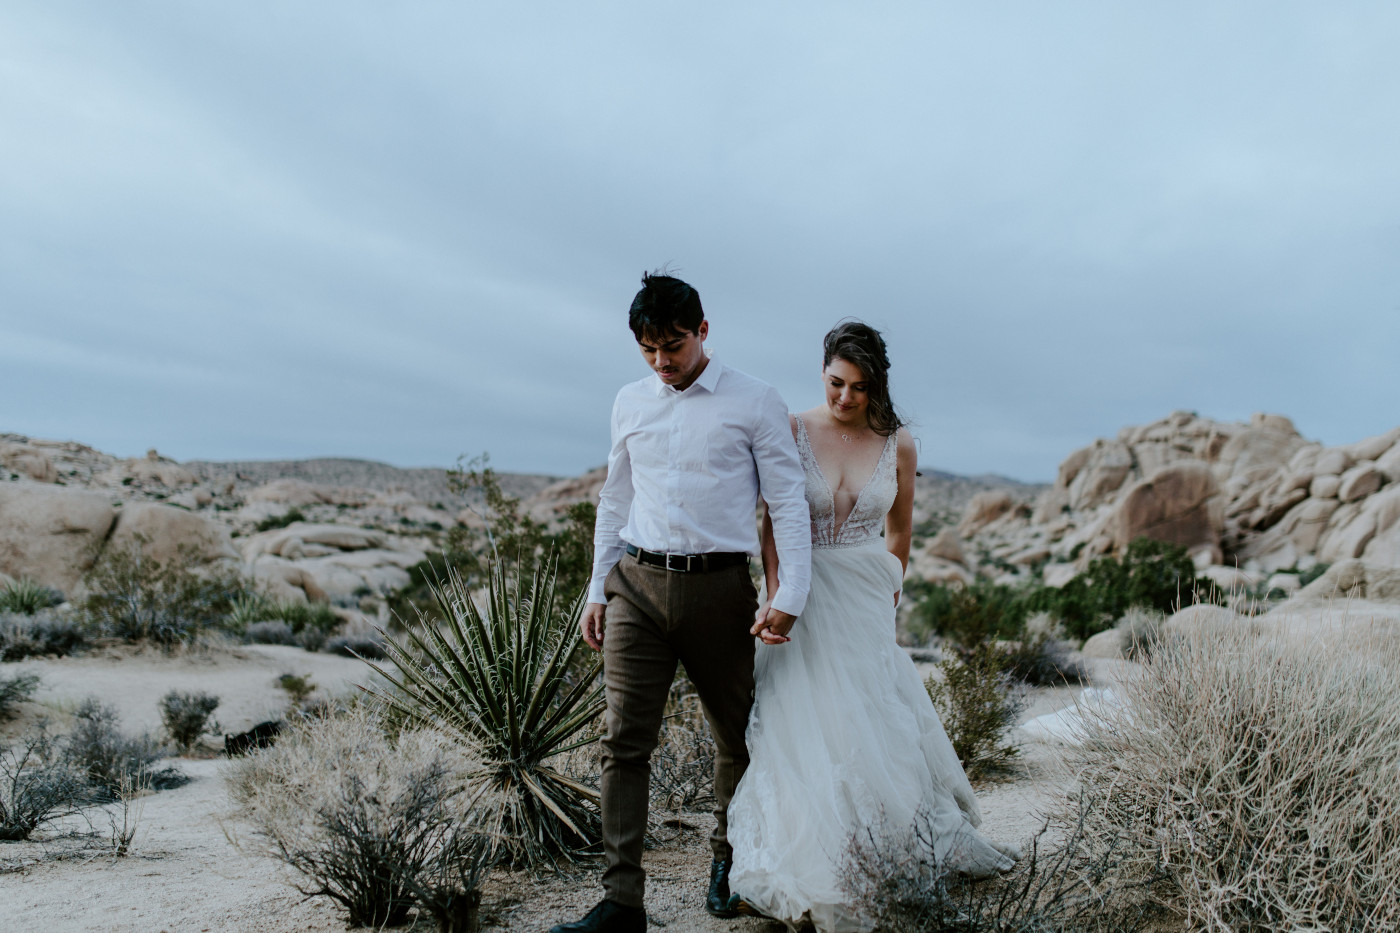 Shelby and Zack walk side by side in Joshua Tree National Park.